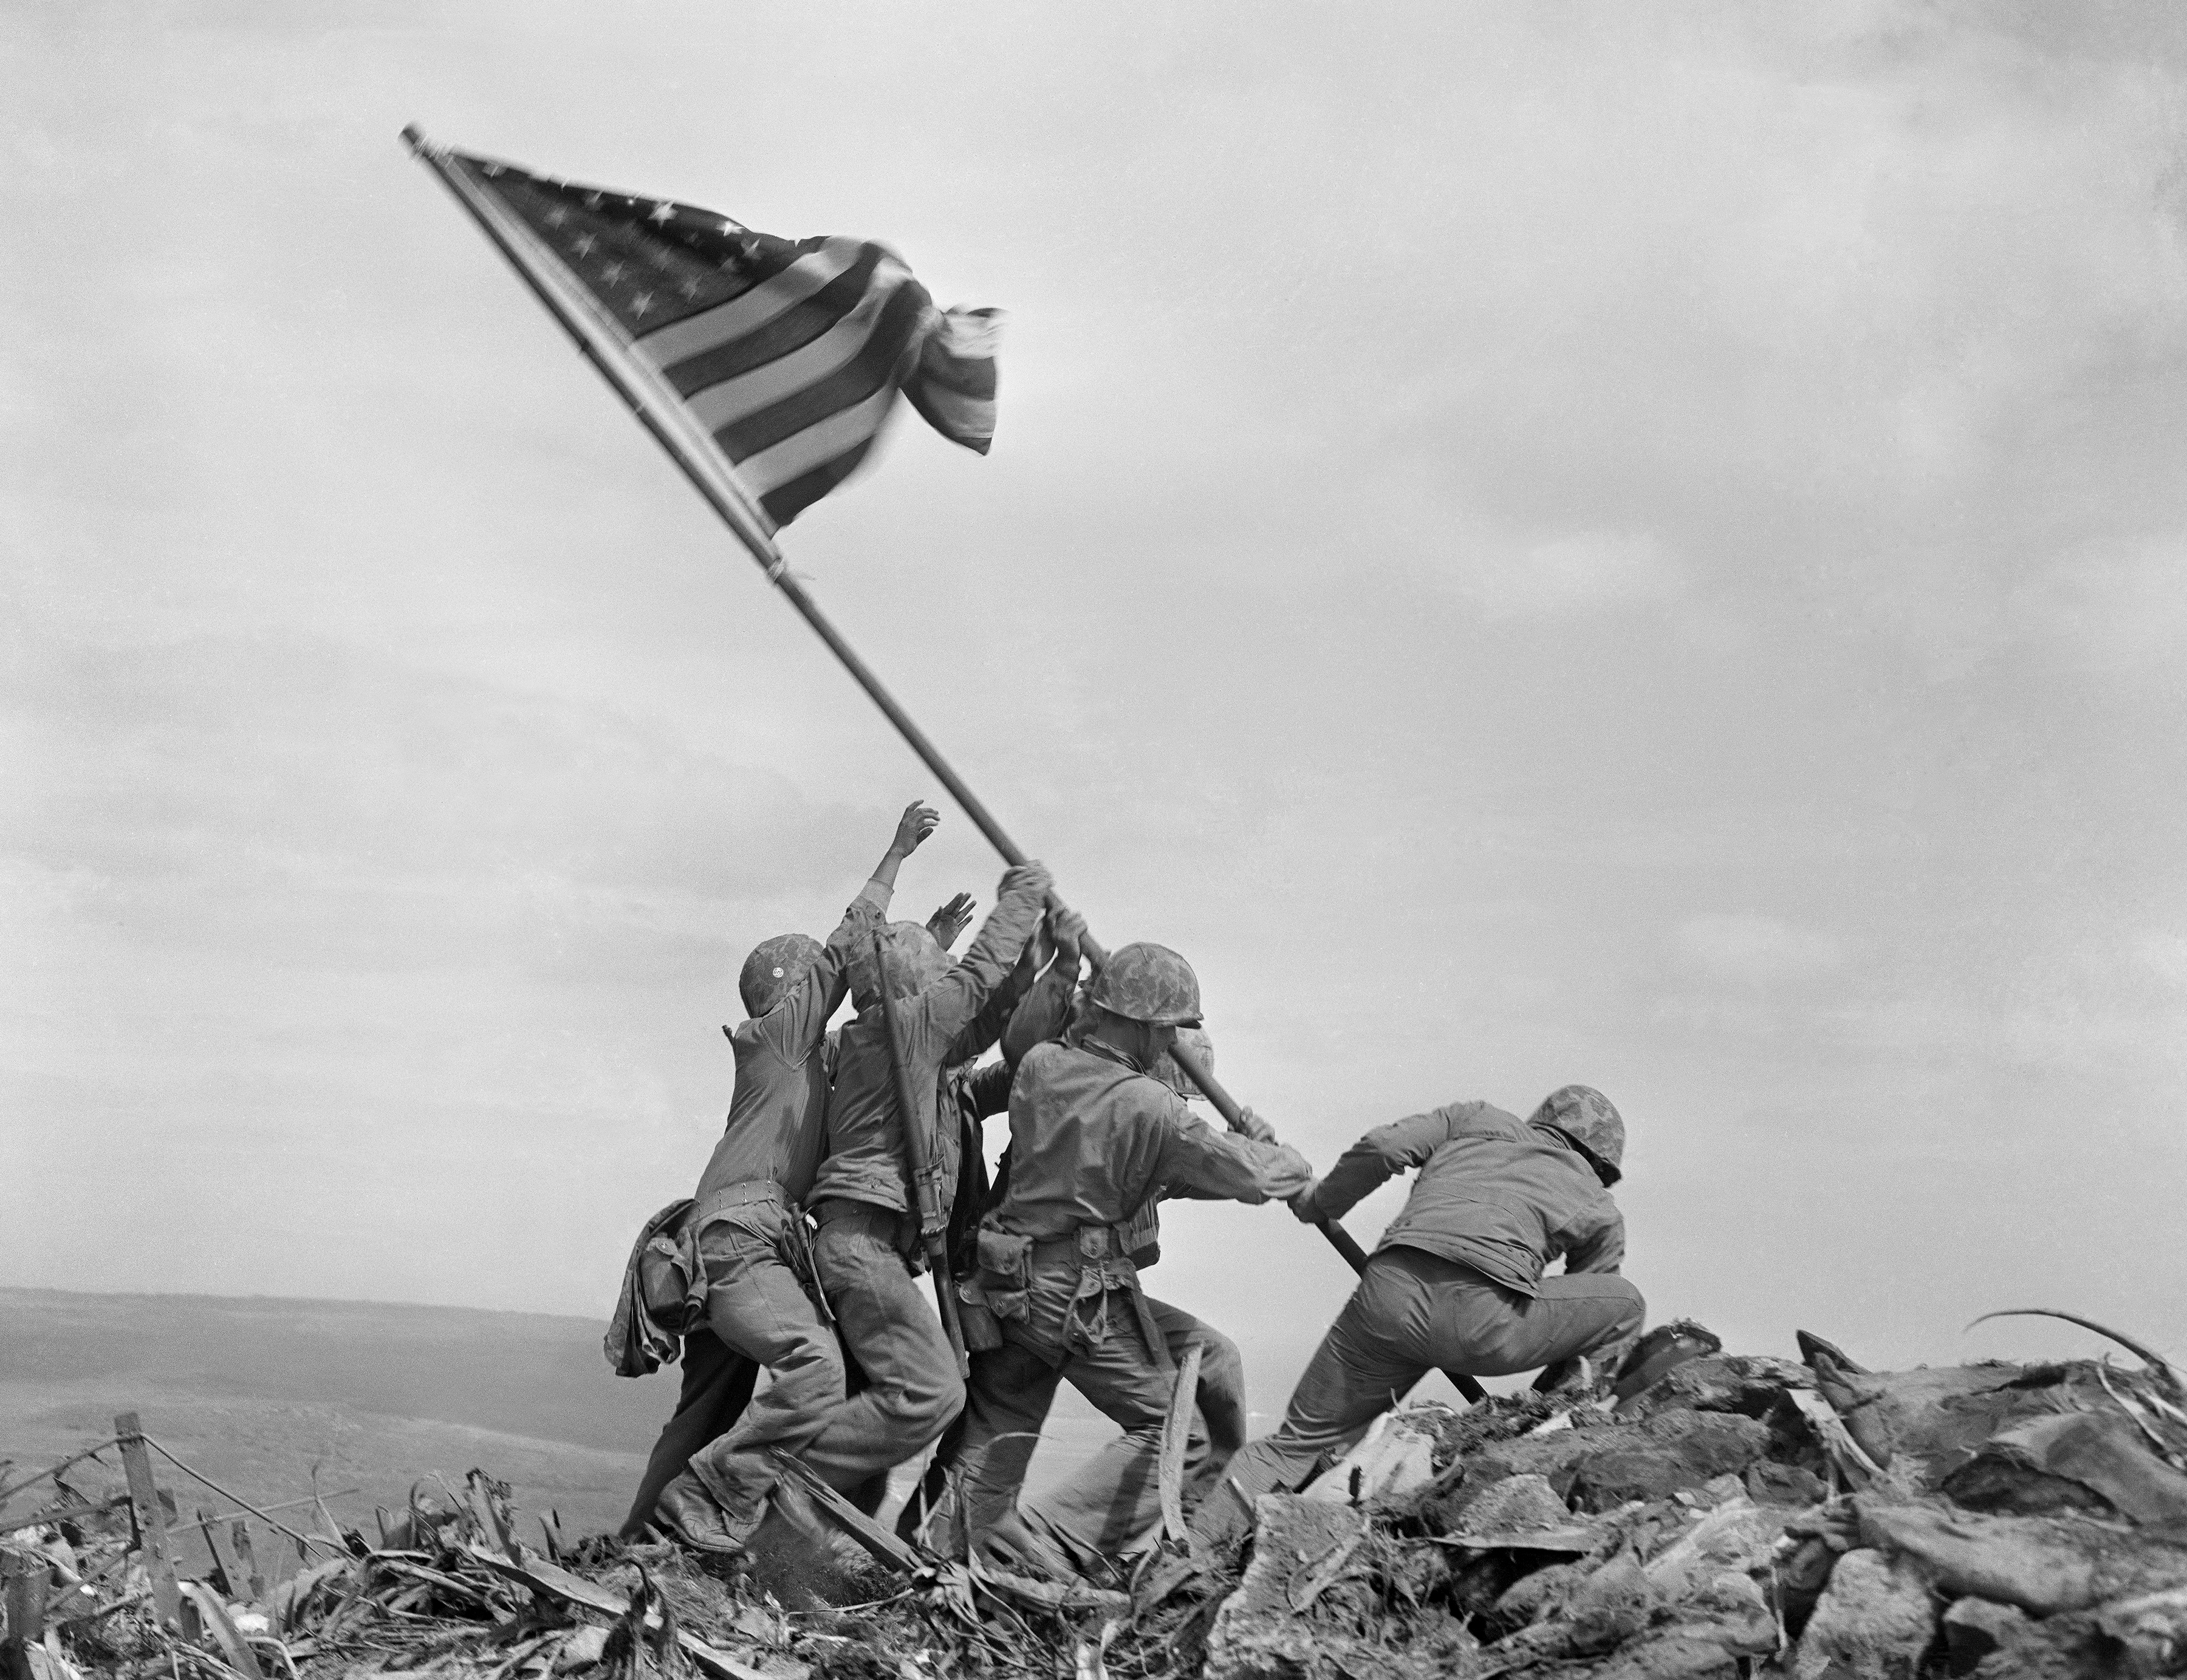 U.S. Marines raise a second, larger American flag atop Mt. Suribachi on the Japanese Island of Iwo Jima, Feb. 23, 1945. Three of the men in the photo were later killed in fighting on the island. This is the only photo to win the Pulitzer Prize in the year it was shot. (AP Photo/Joe Rosenthal)